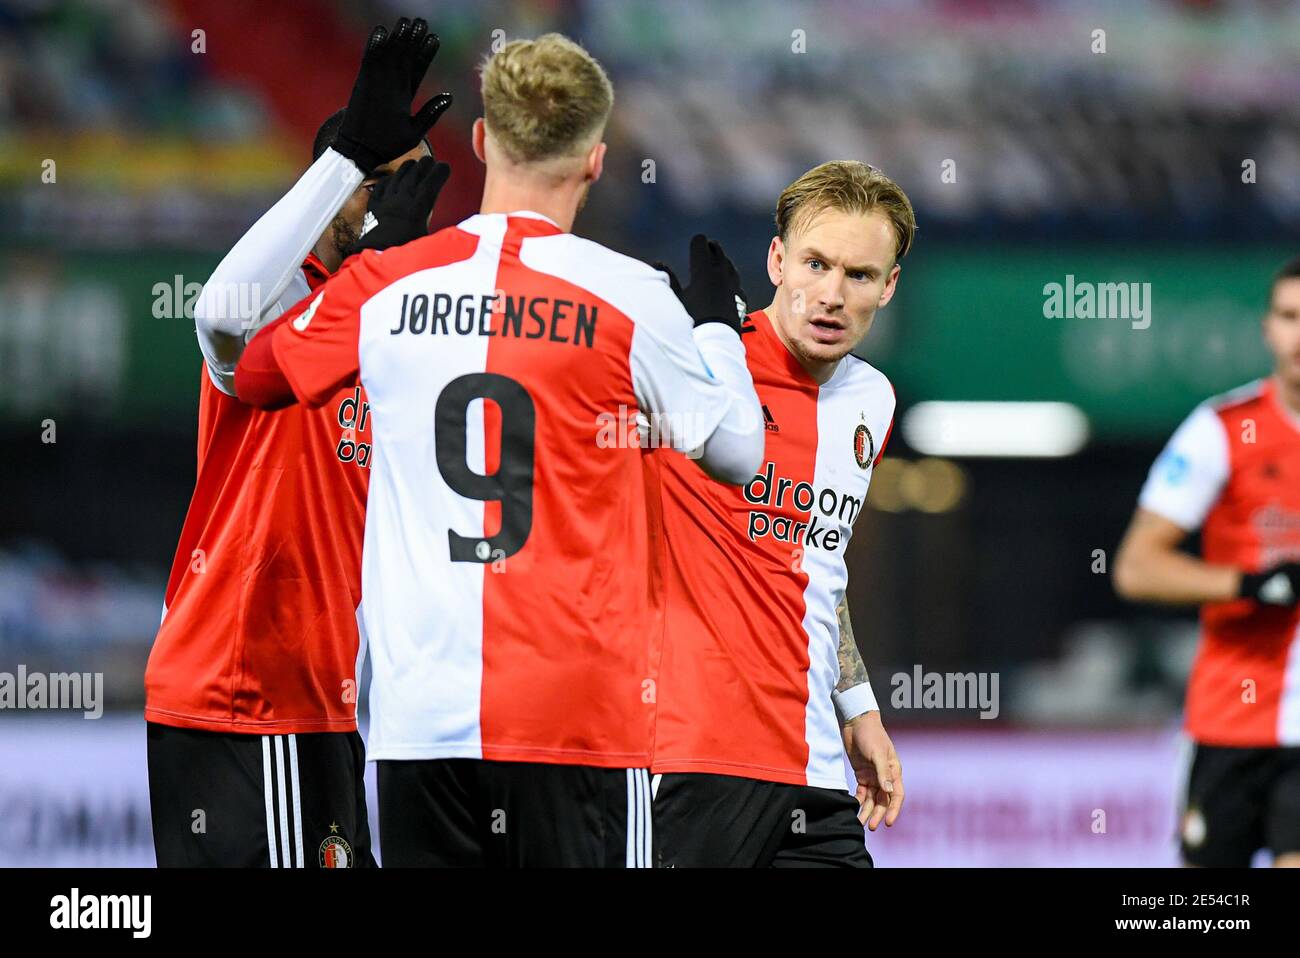 ROTTERDAM, NETHERLANDS - JANUARY 24: Mark Diemers of Feyenoord celebrating the second goal with teammates during the Dutch Eredivisie match between Fe Stock Photo